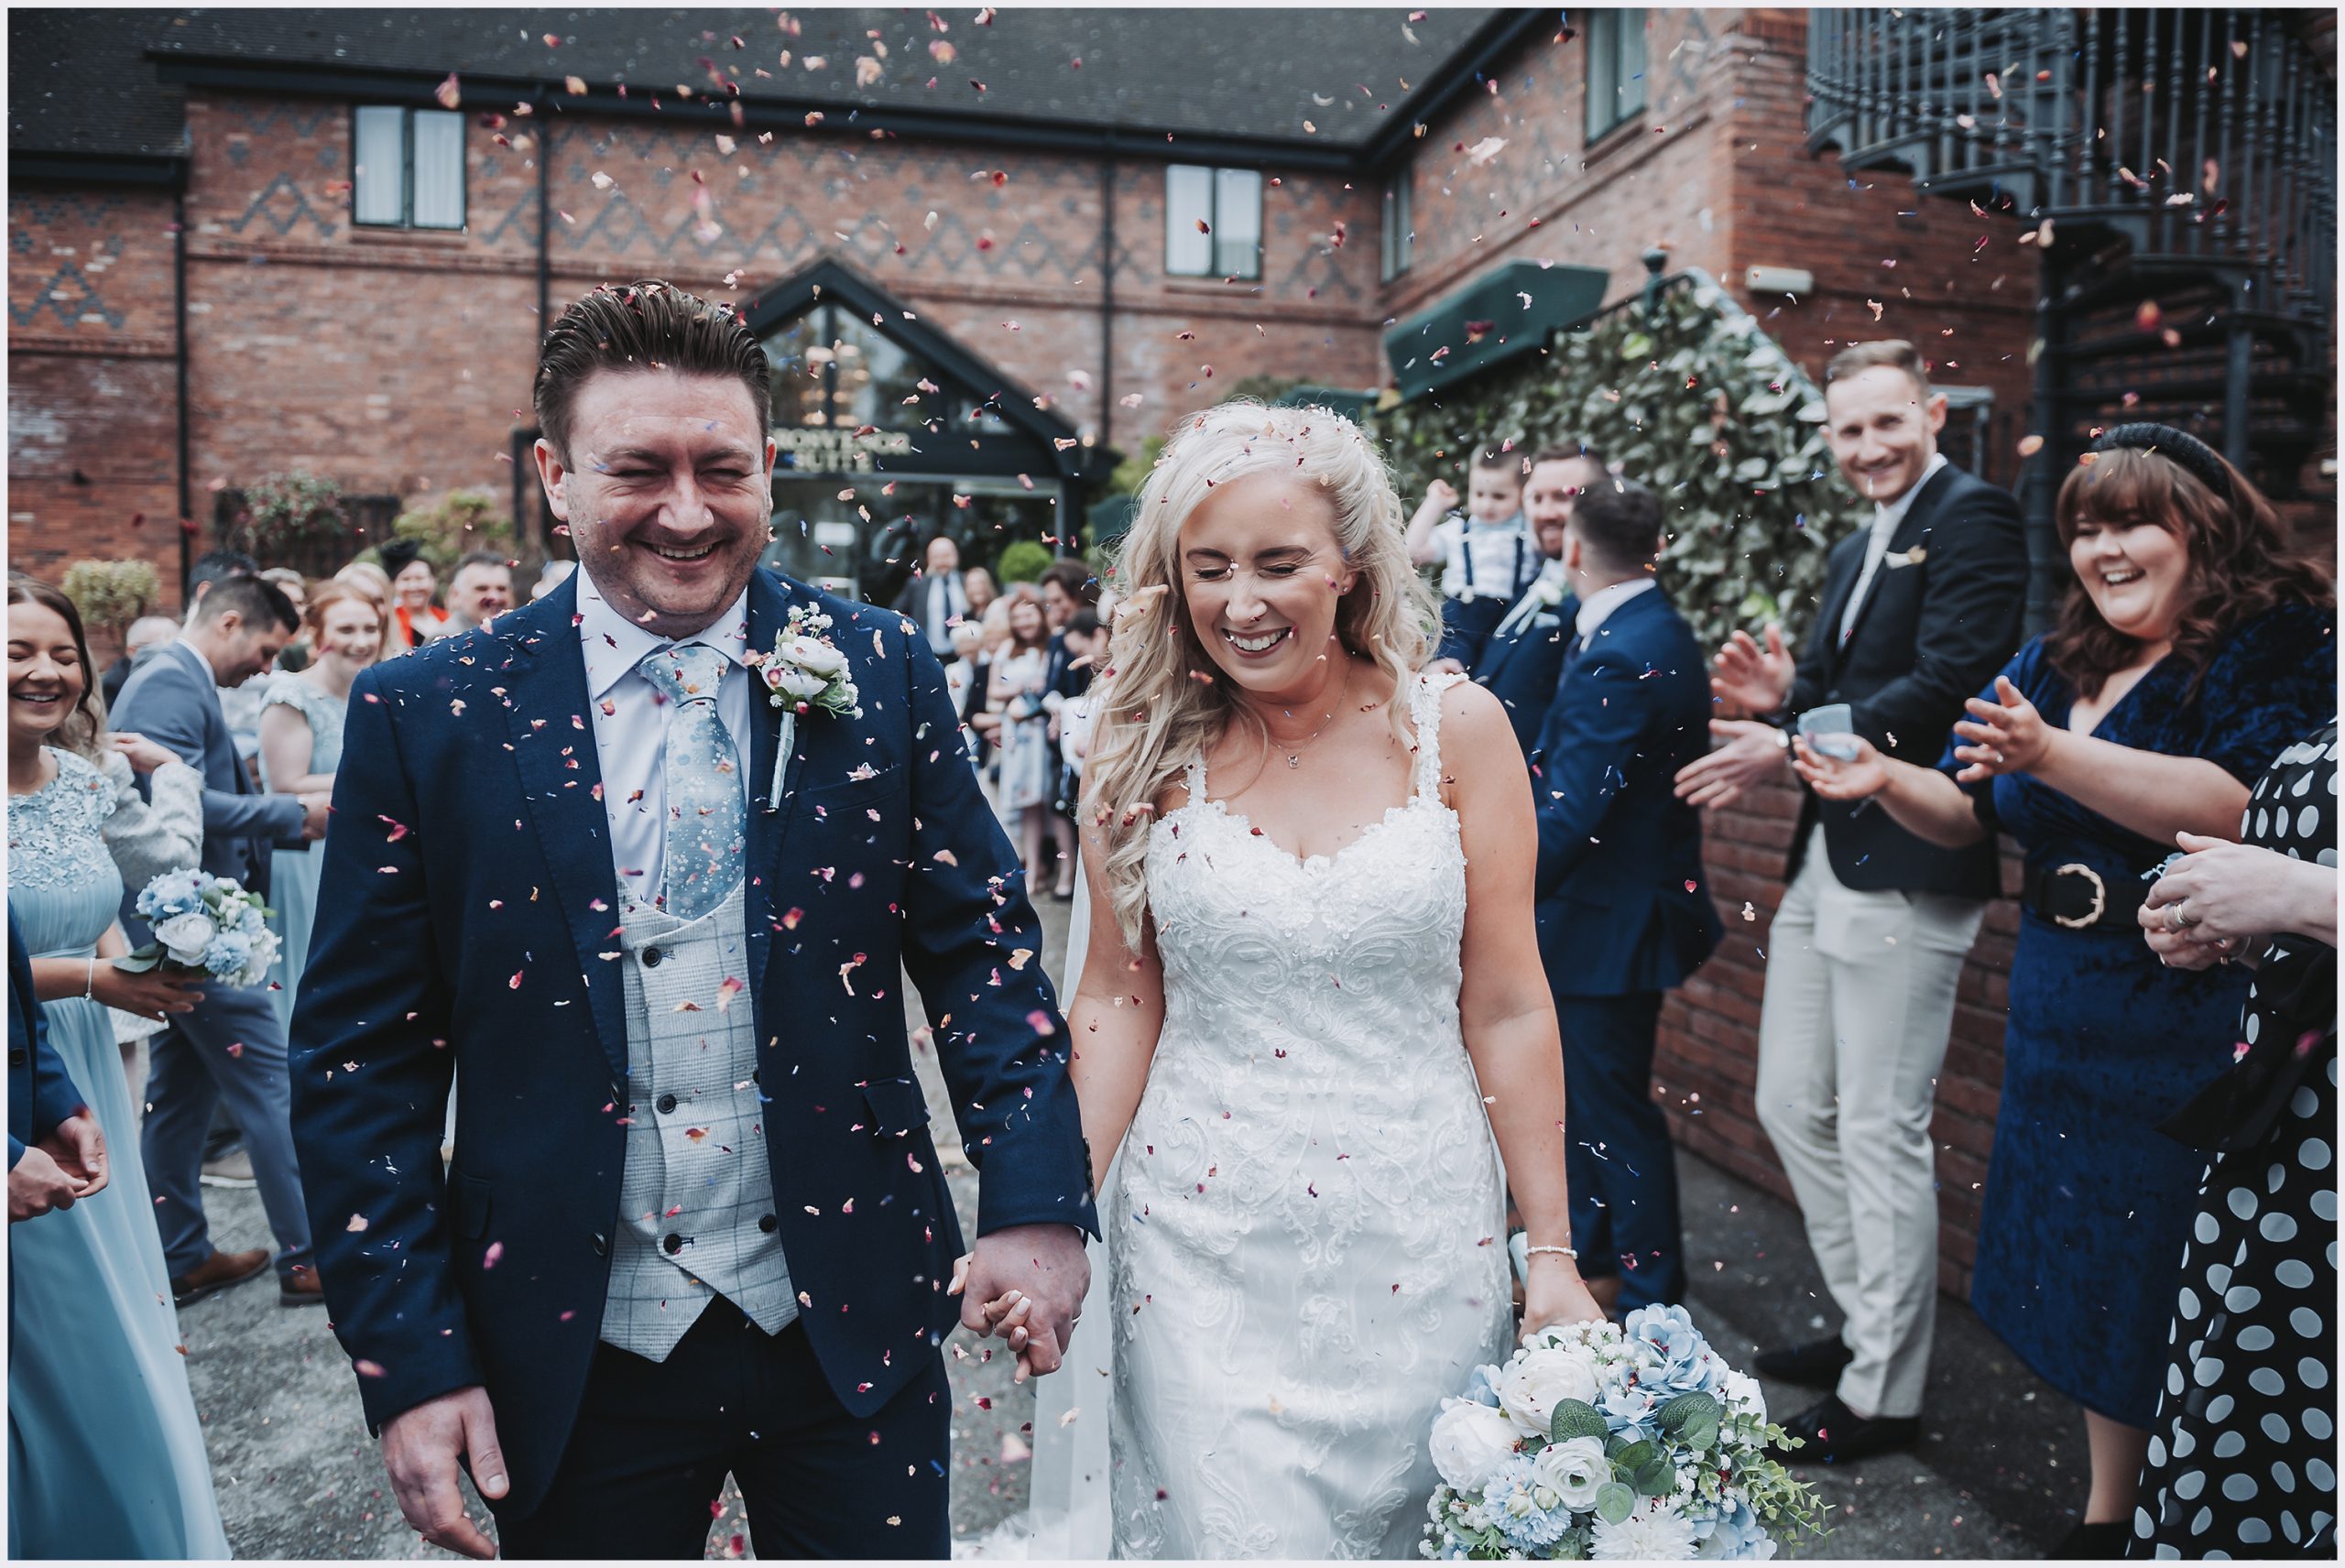 A newly married bride and groom smile and laugh as their guests shower them with confetti outside The Grosvenor Pulford Hotel and Spa.  Image captured by north Wlaes wedding photographer Helena Jayne Photography.